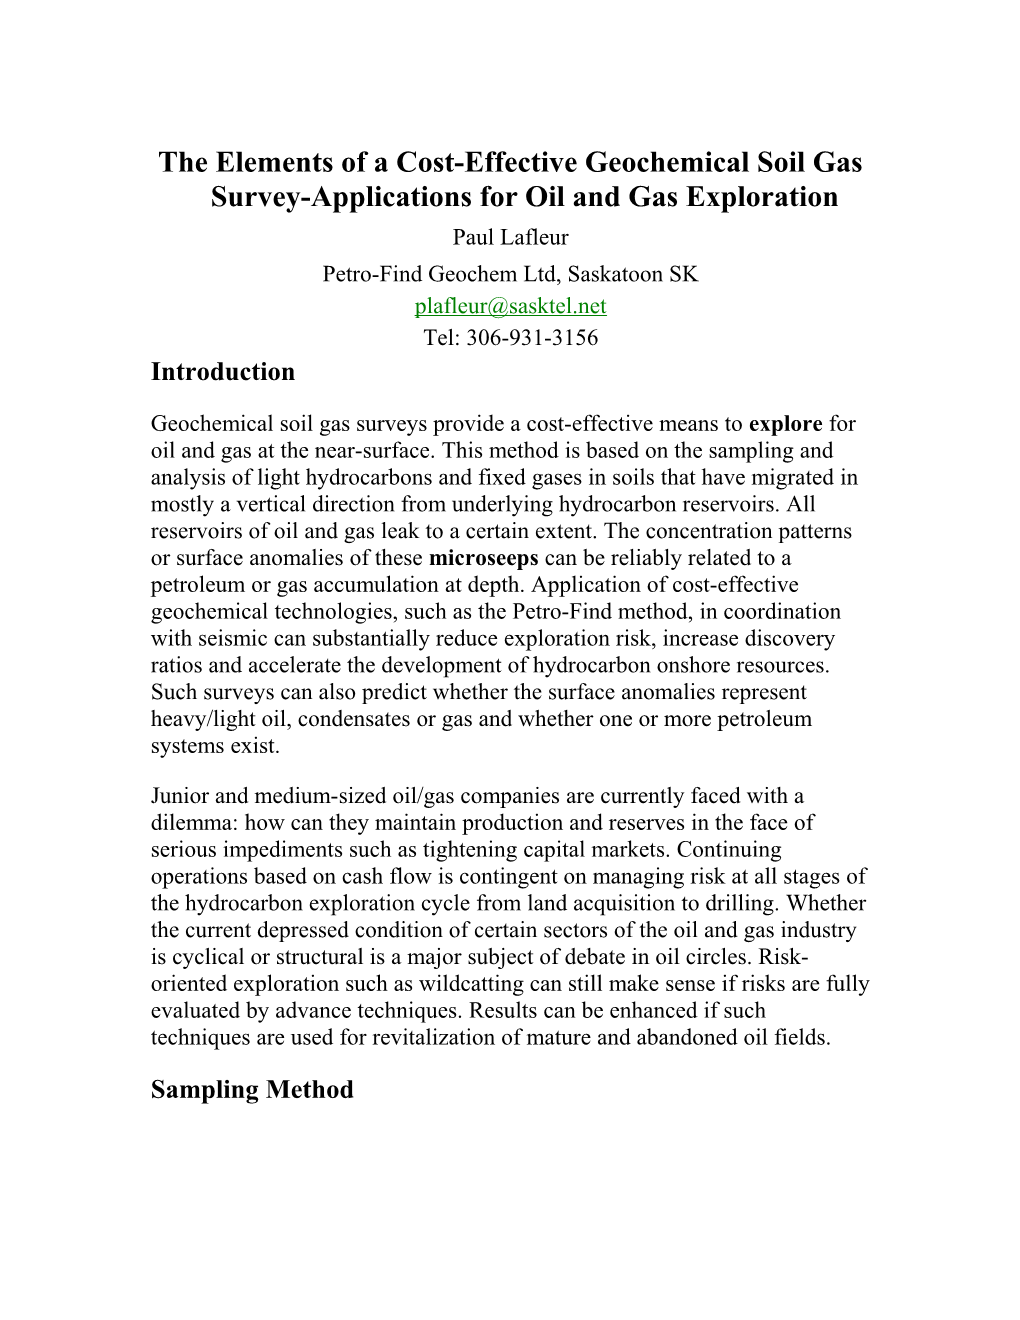 The Elements of a Cost-Effective Geochemical Soil Gas Survey-Applications for Oil and Gas